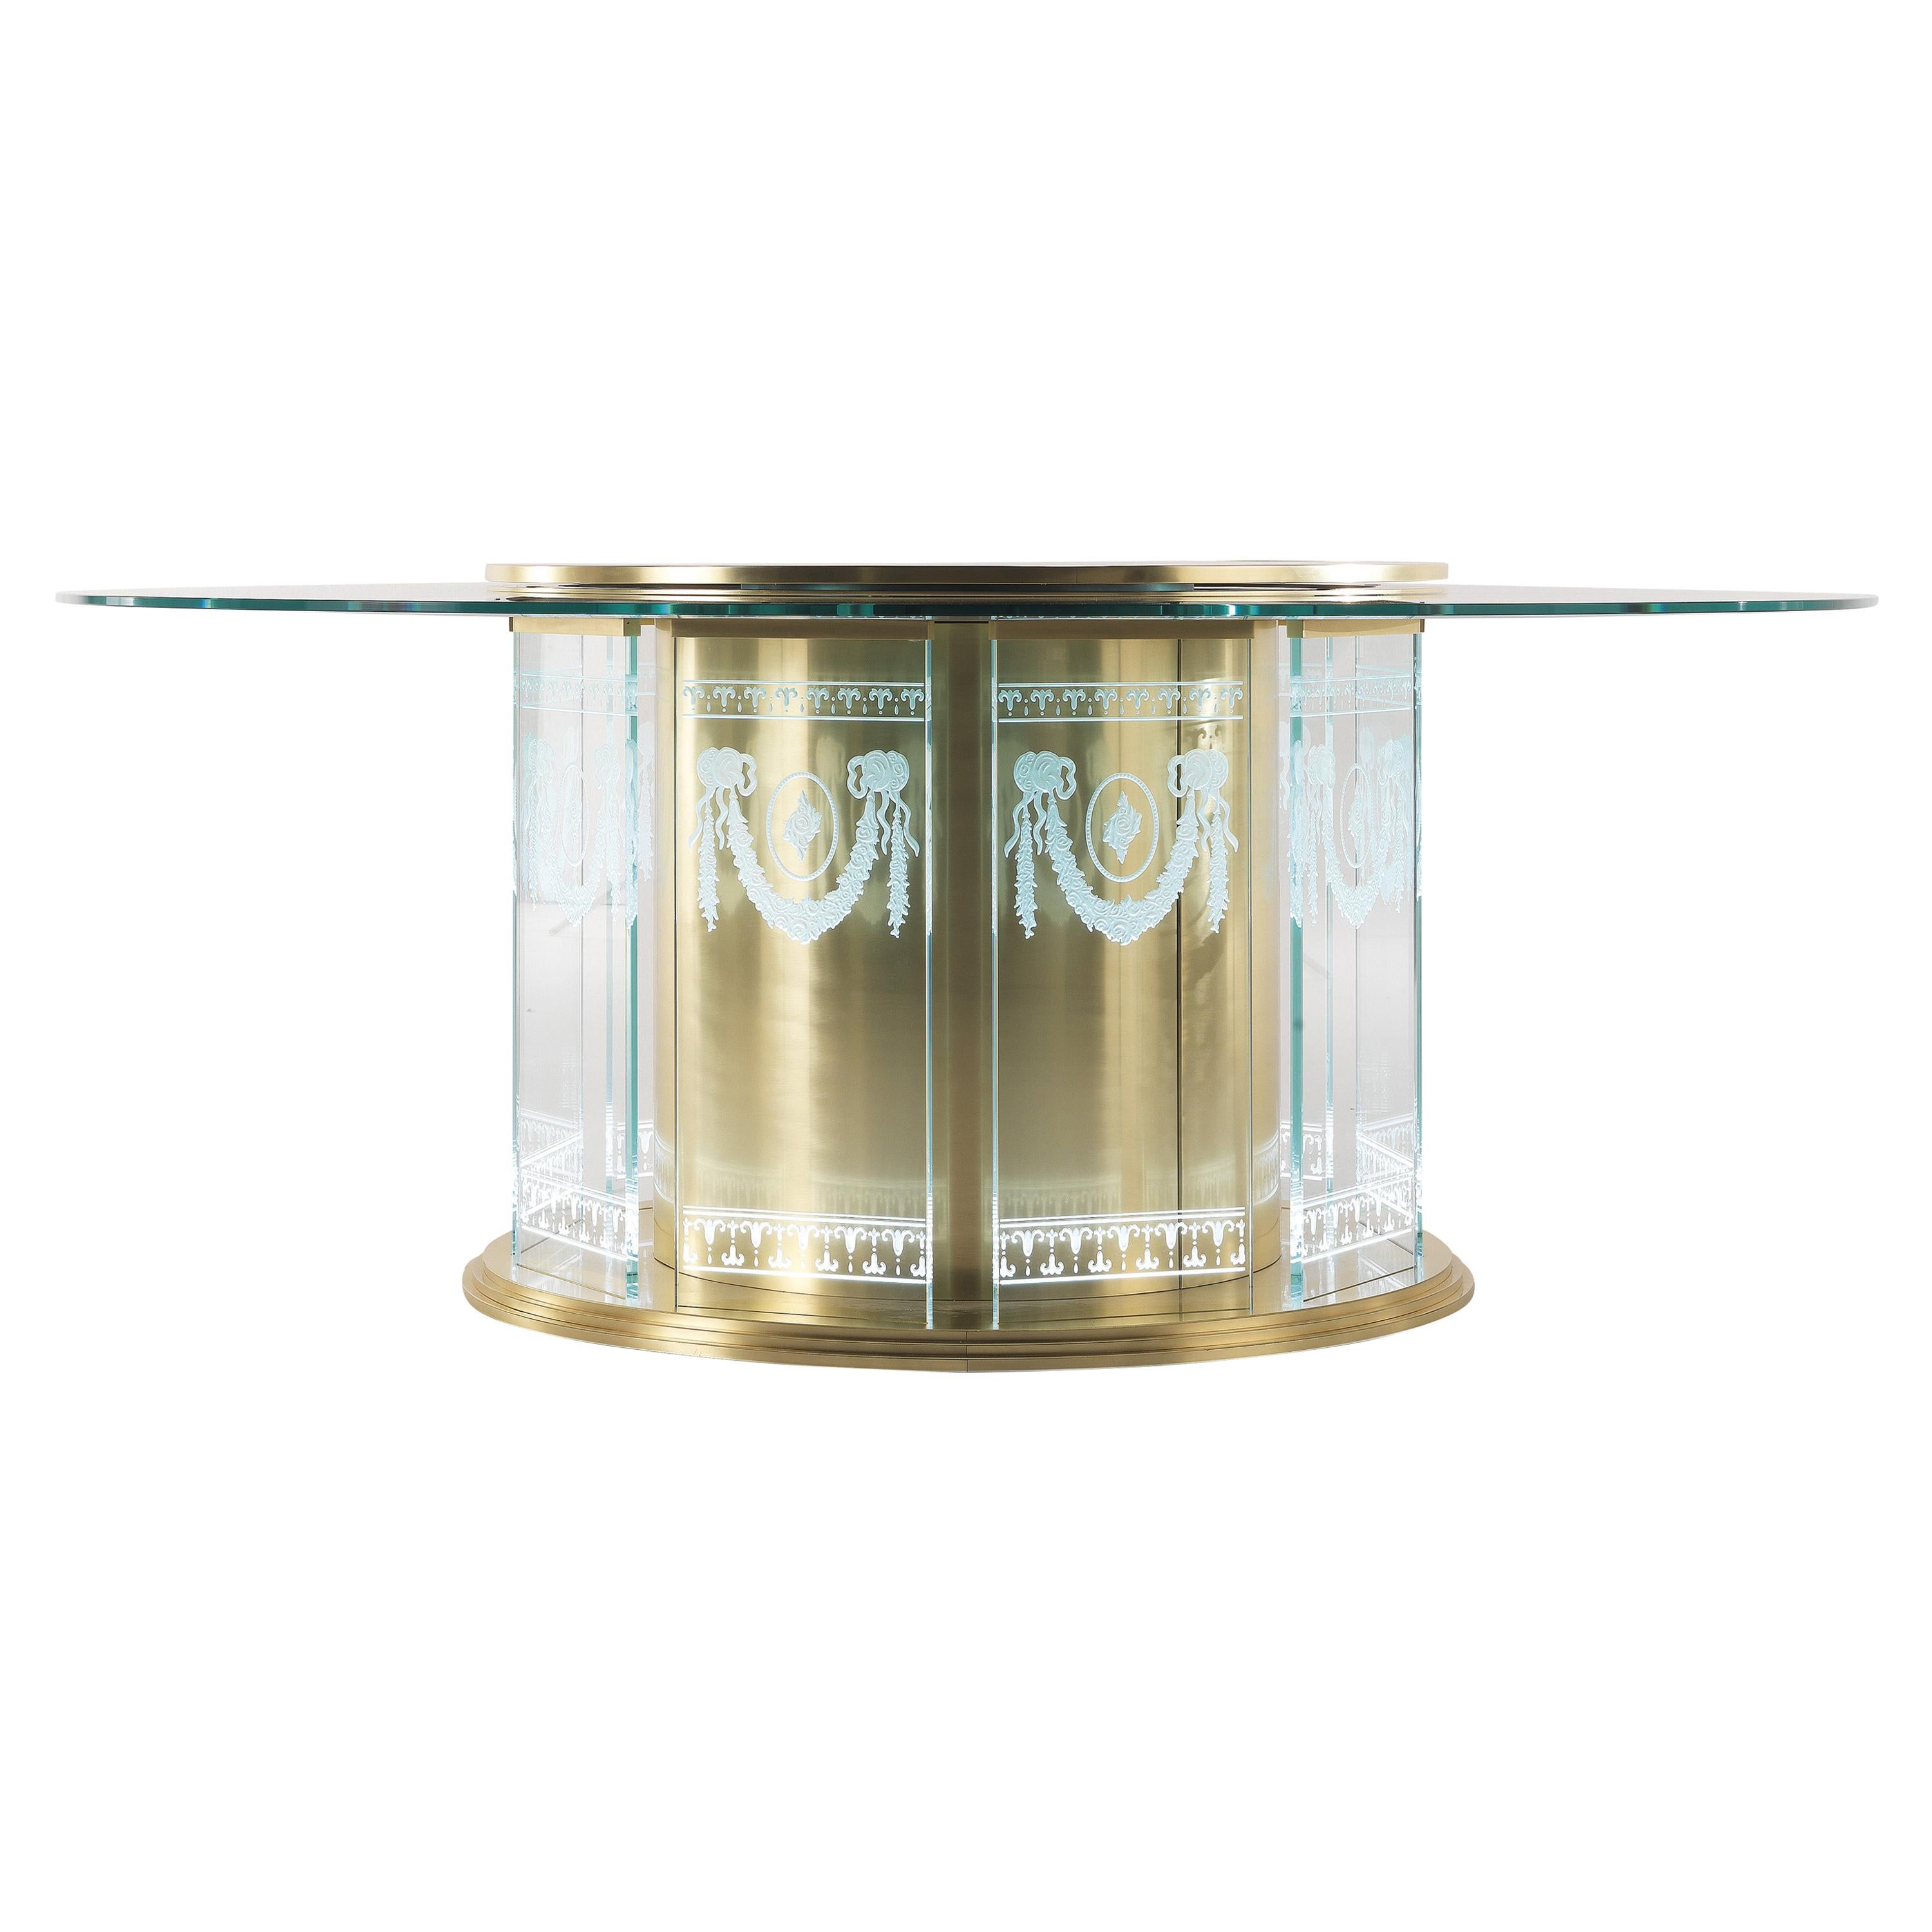 A scenographic dining table that demonstrates Jumbo Collection’s technical and artistic skills. The special manufacturing of the glass, engraved in several steps and with different depths, gives a three-dimensional effect to the drawings, studied ad